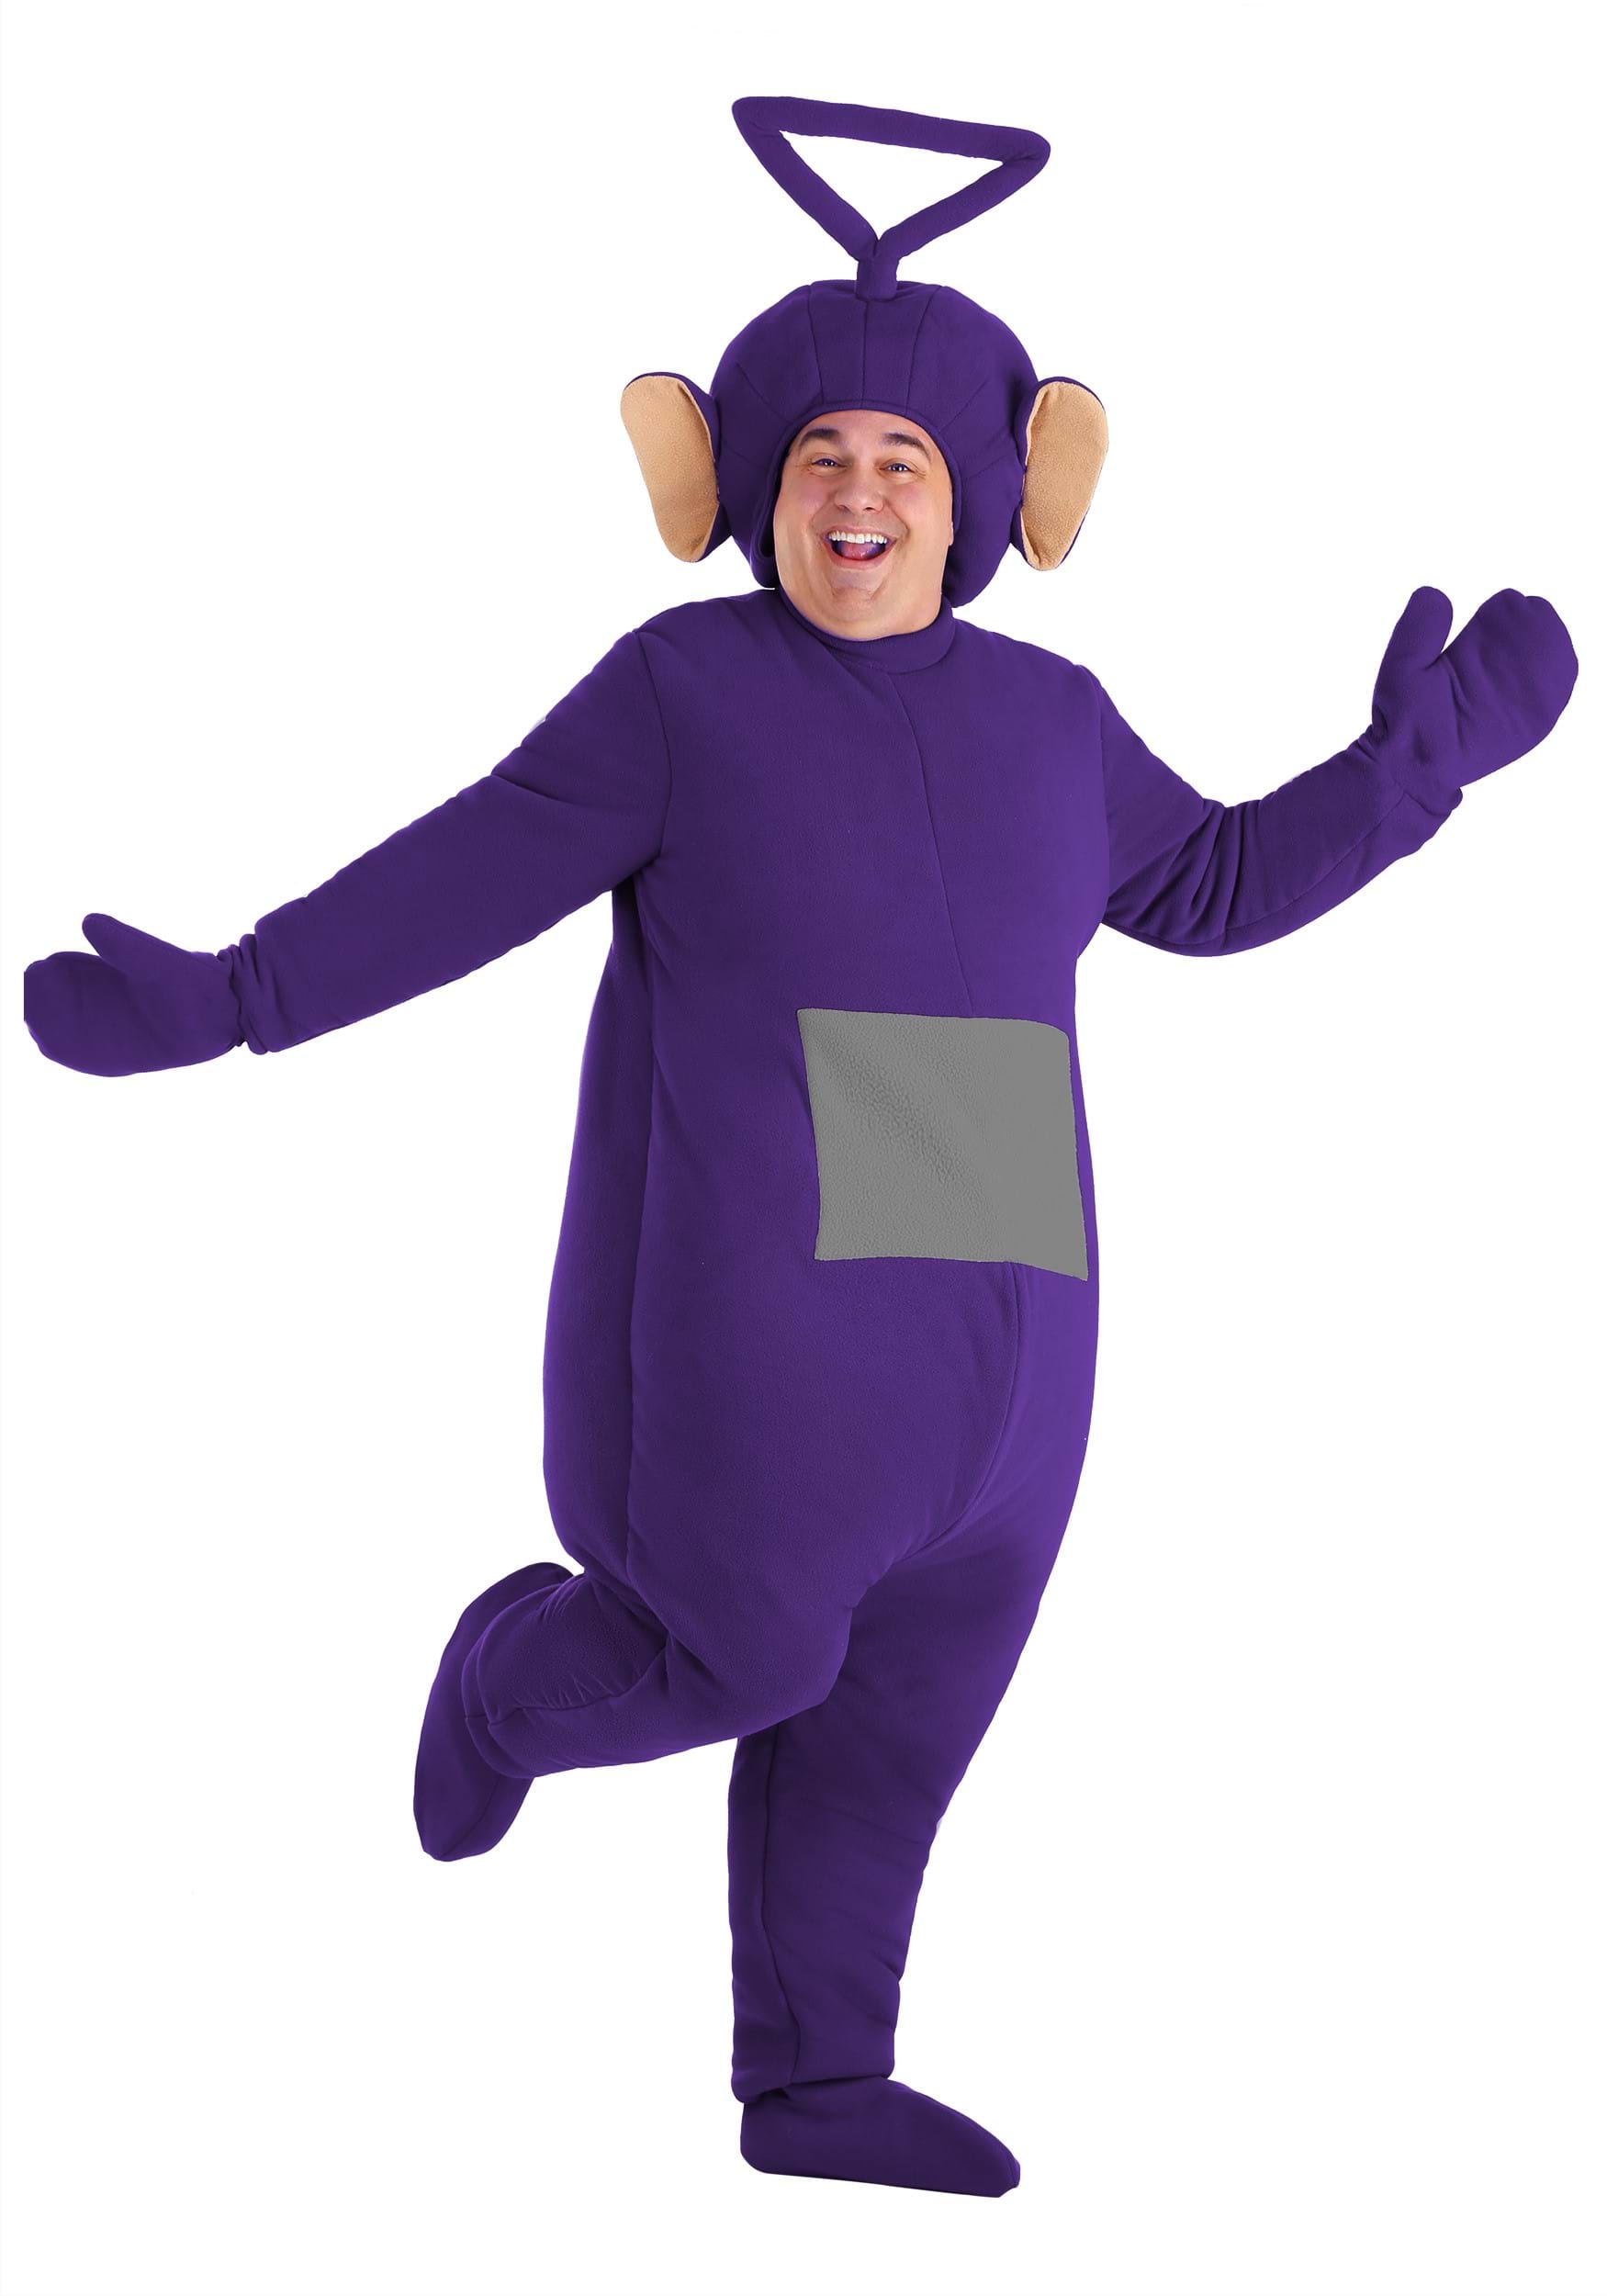 Photos - Fancy Dress FUN Costumes Plus Size Tinky Winky Teletubbies Costume for Adults Purple&#